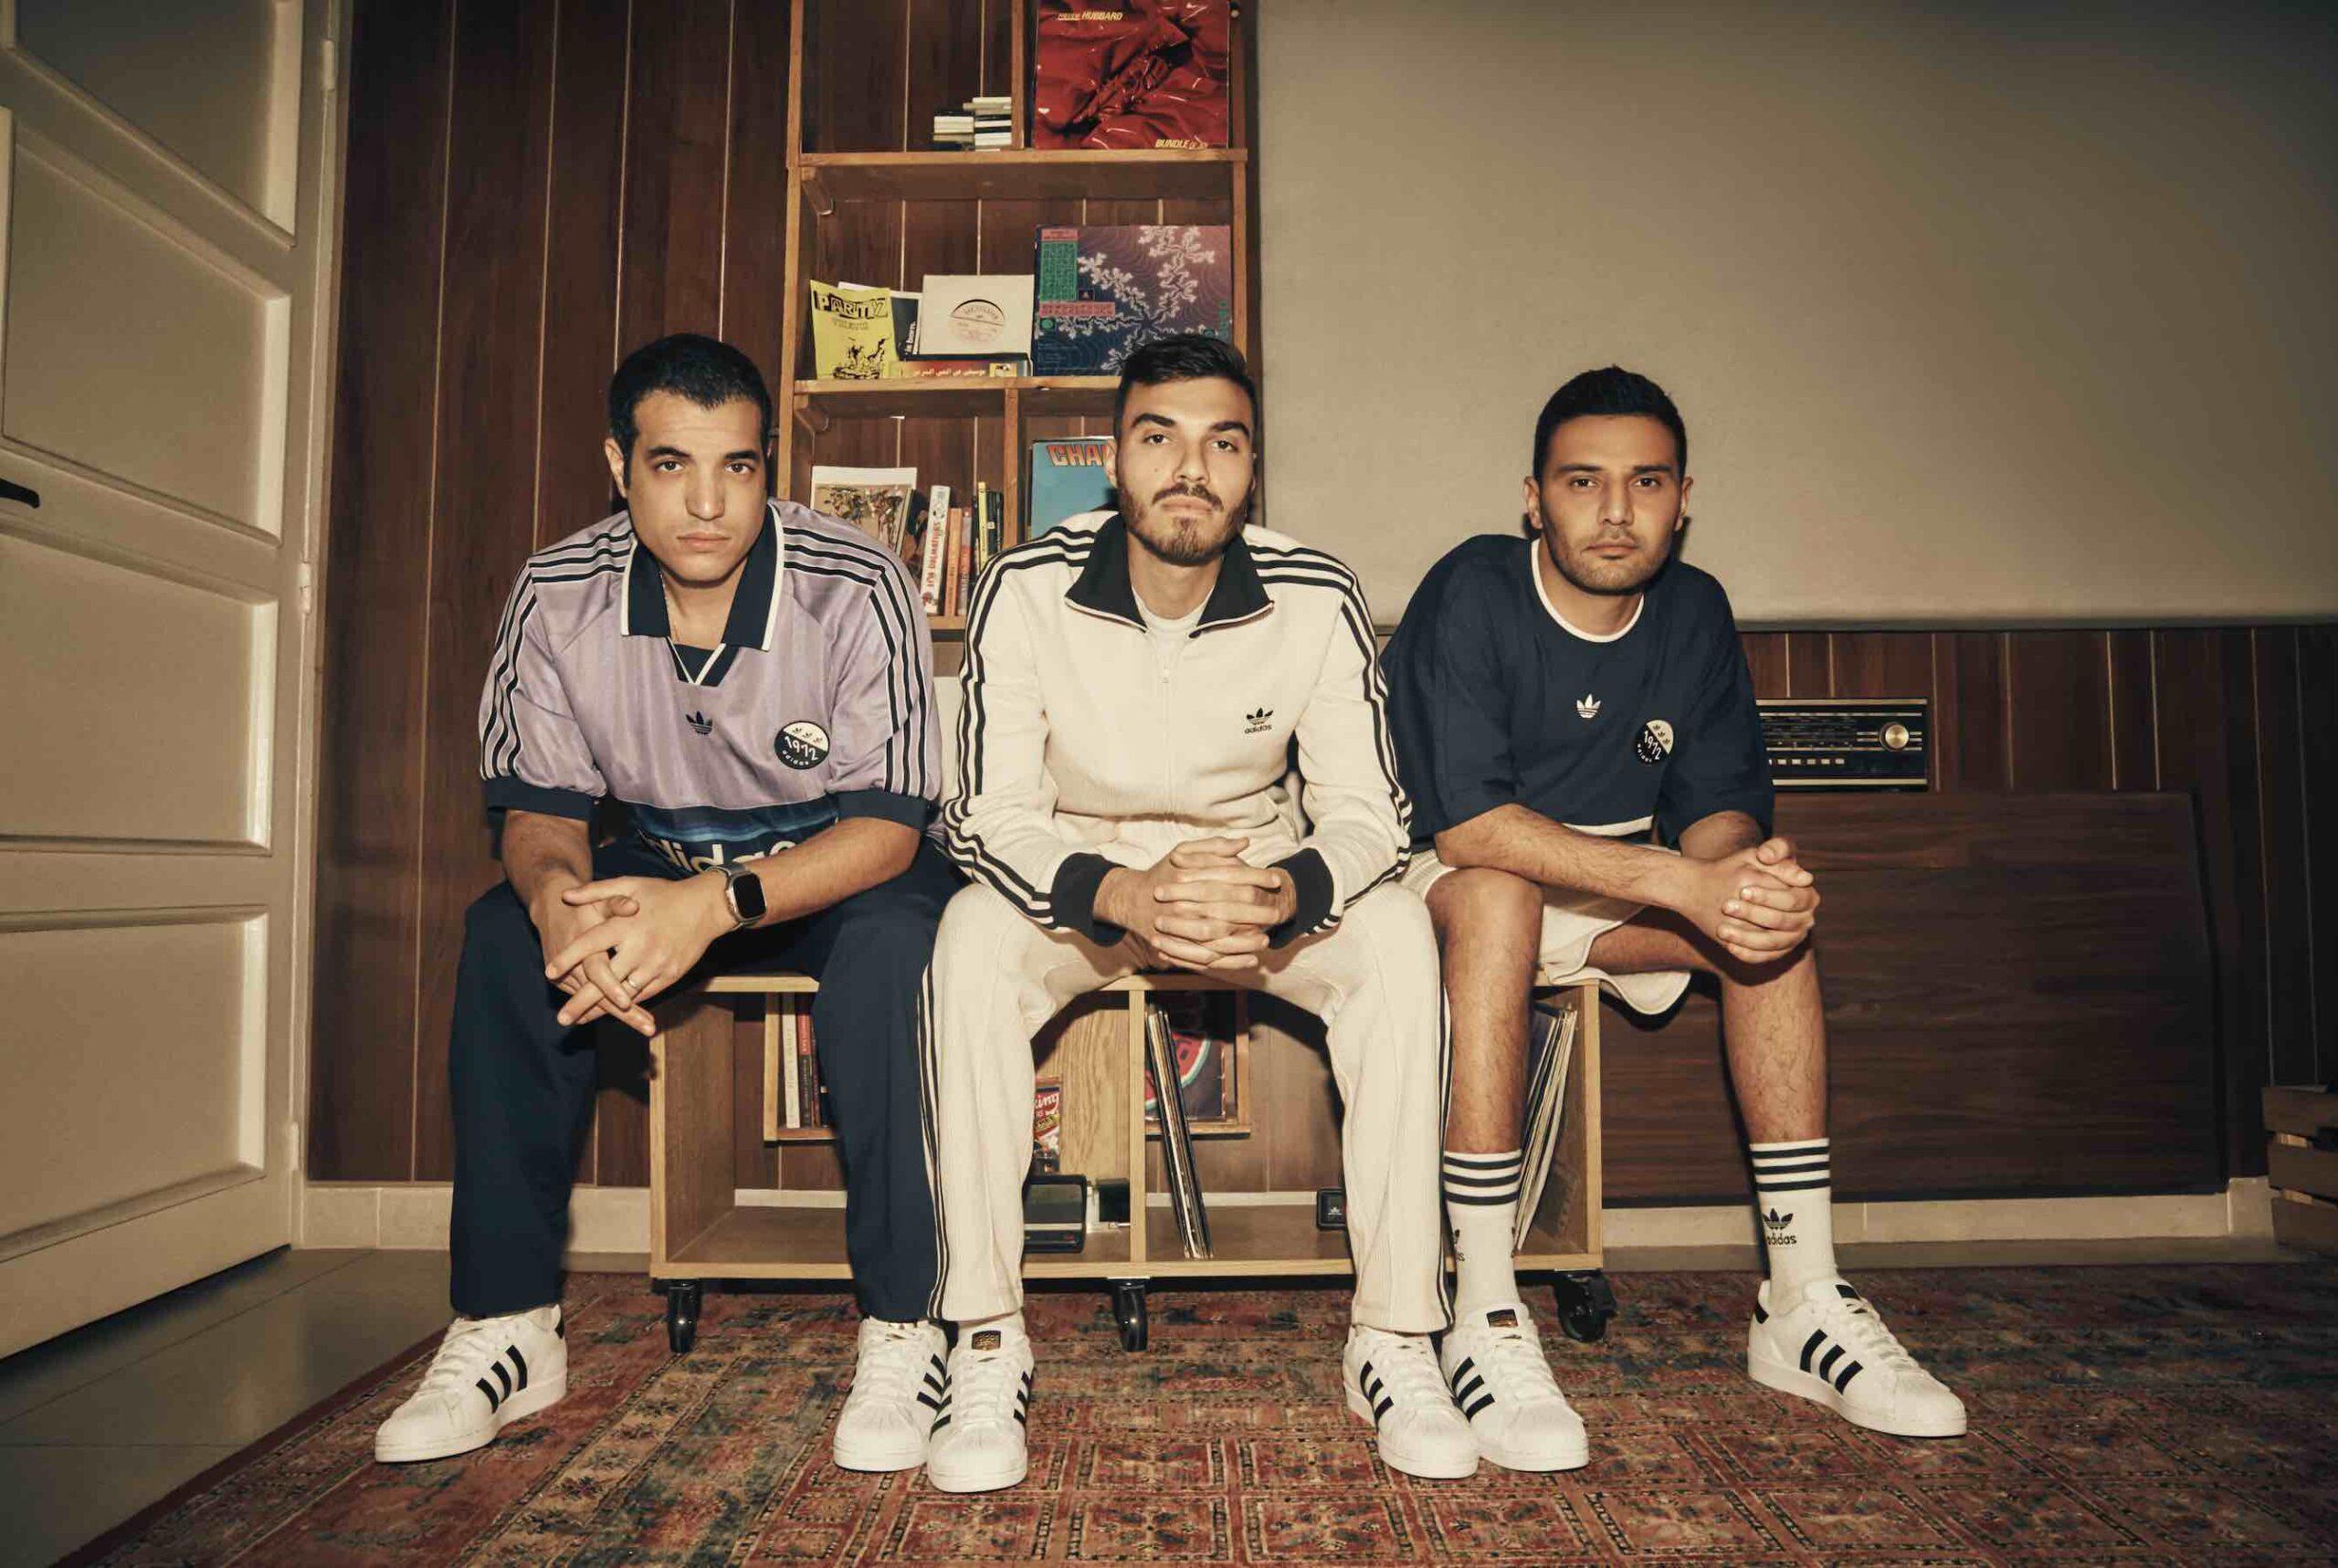 adidas teams up Disco Misr and Almas for a new campaign